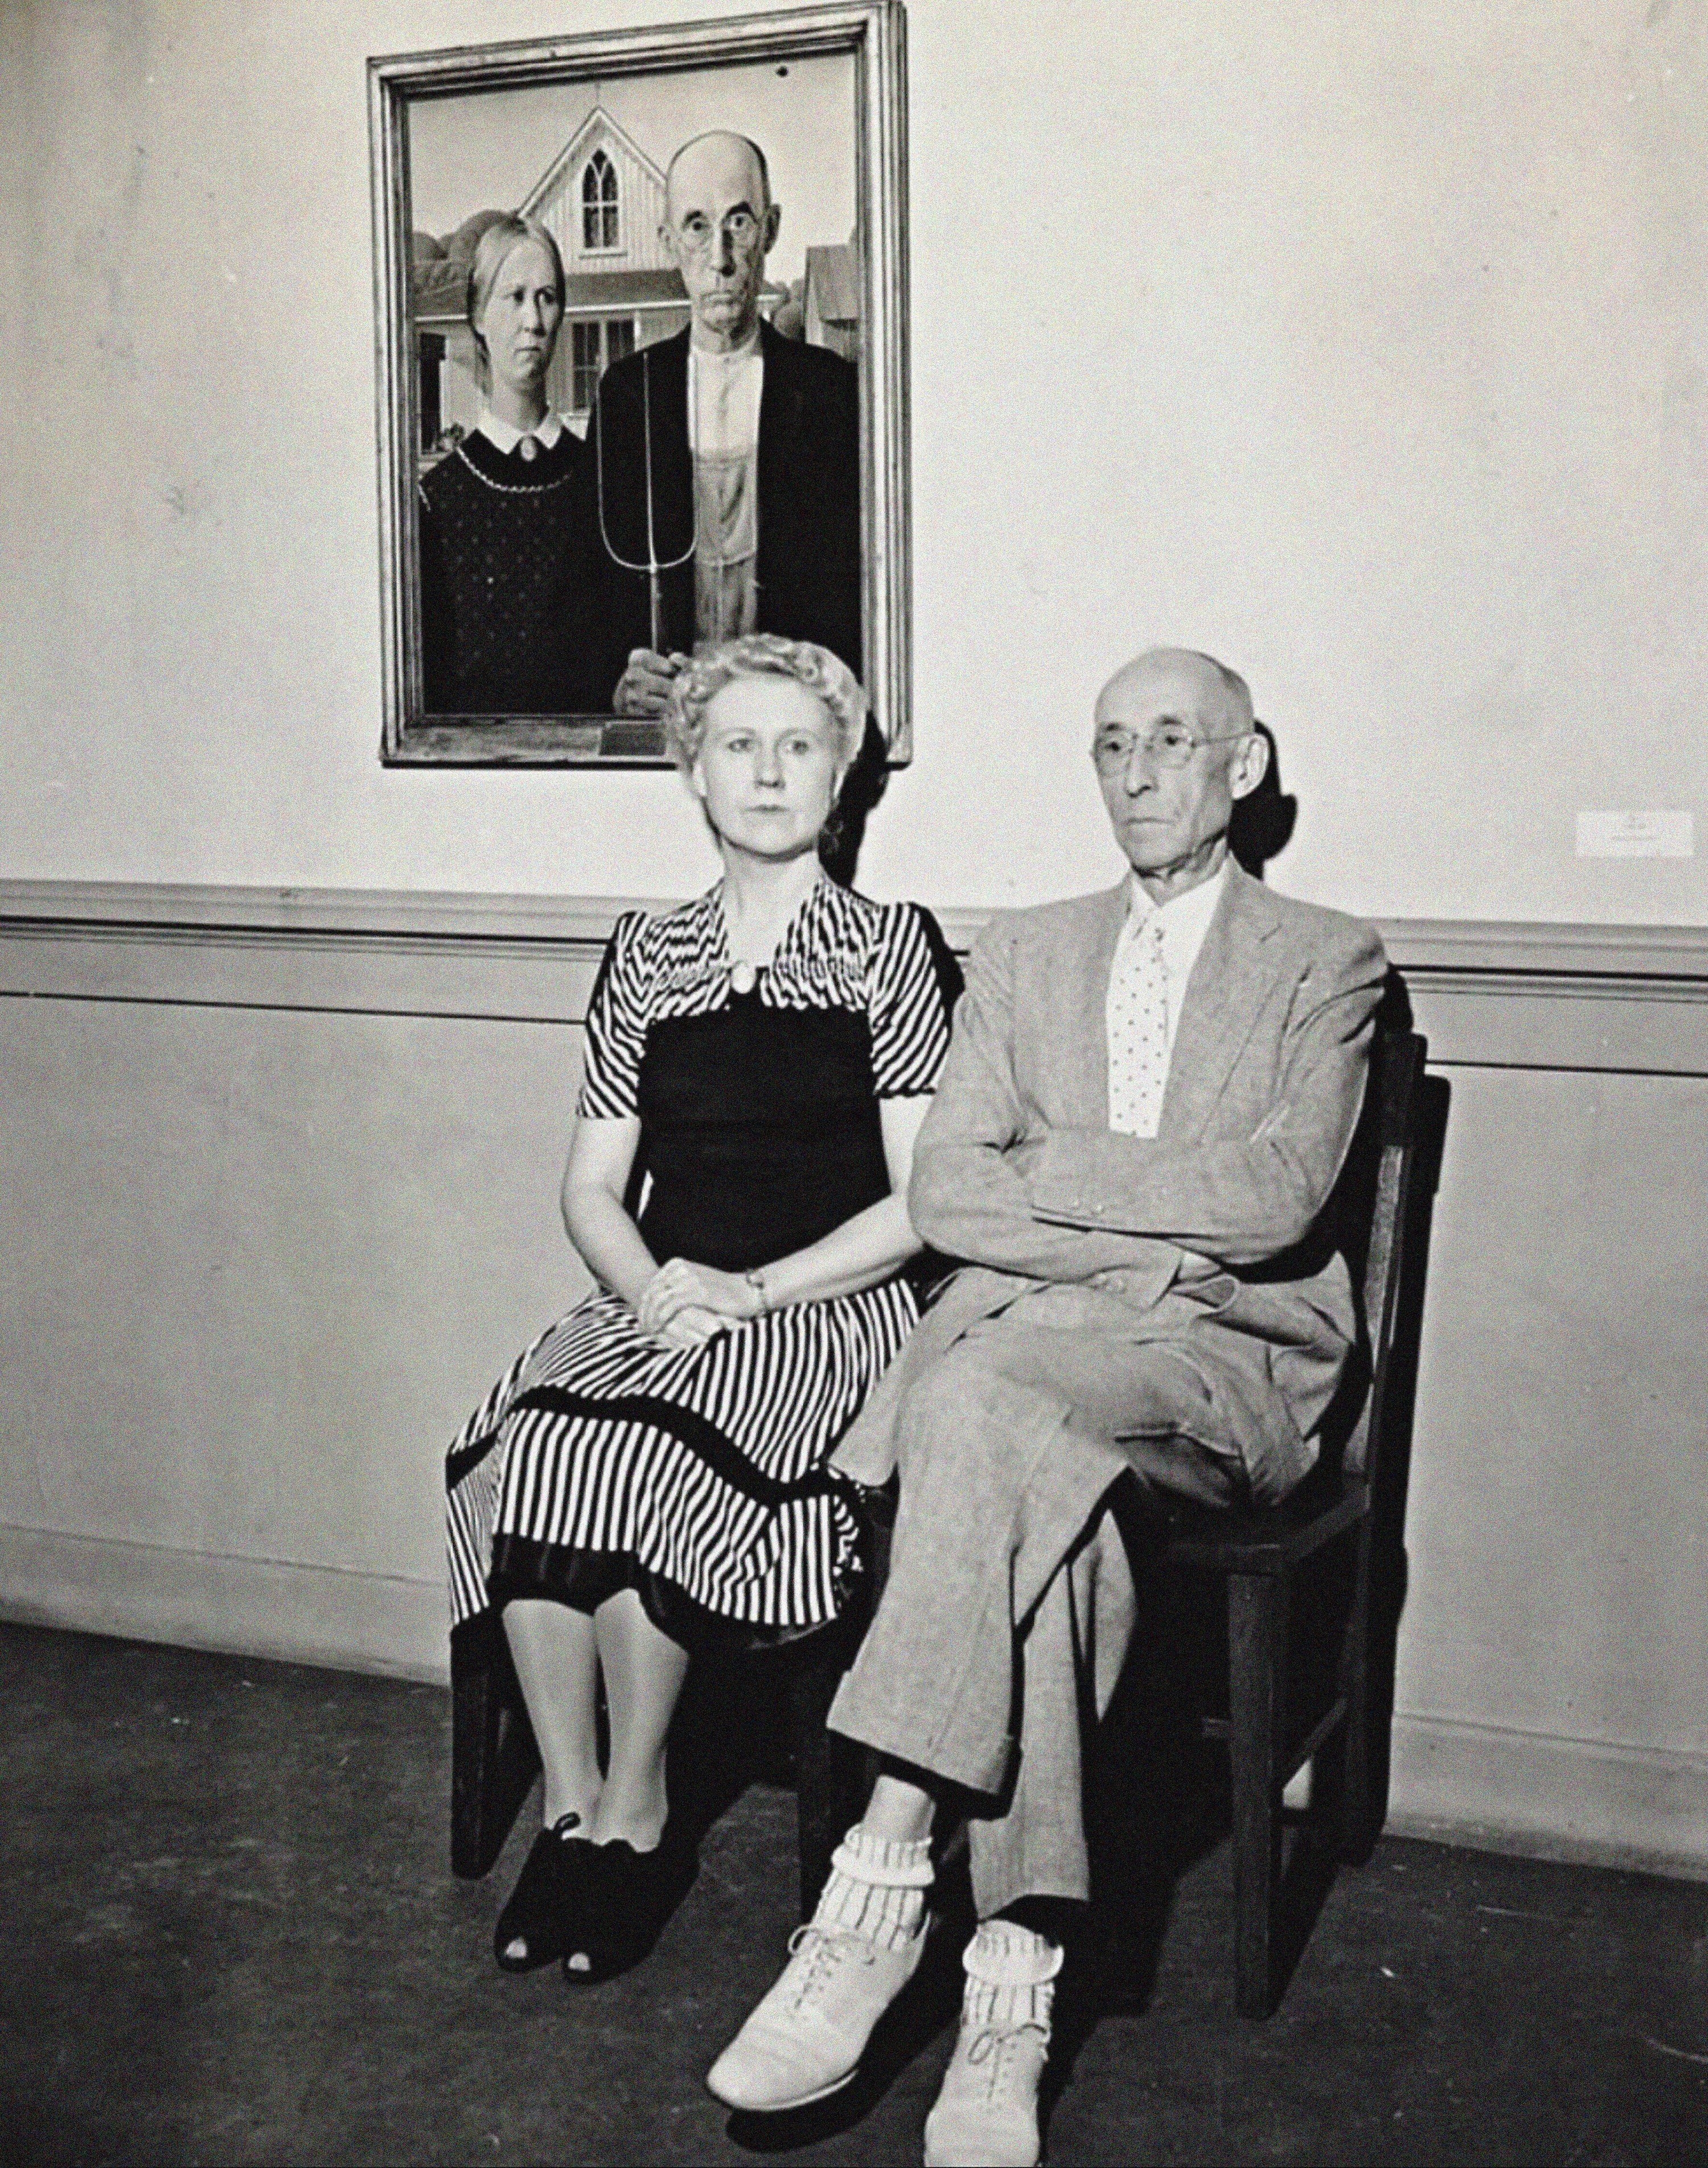 The real people from the &quot;American Gothic&quot; painting